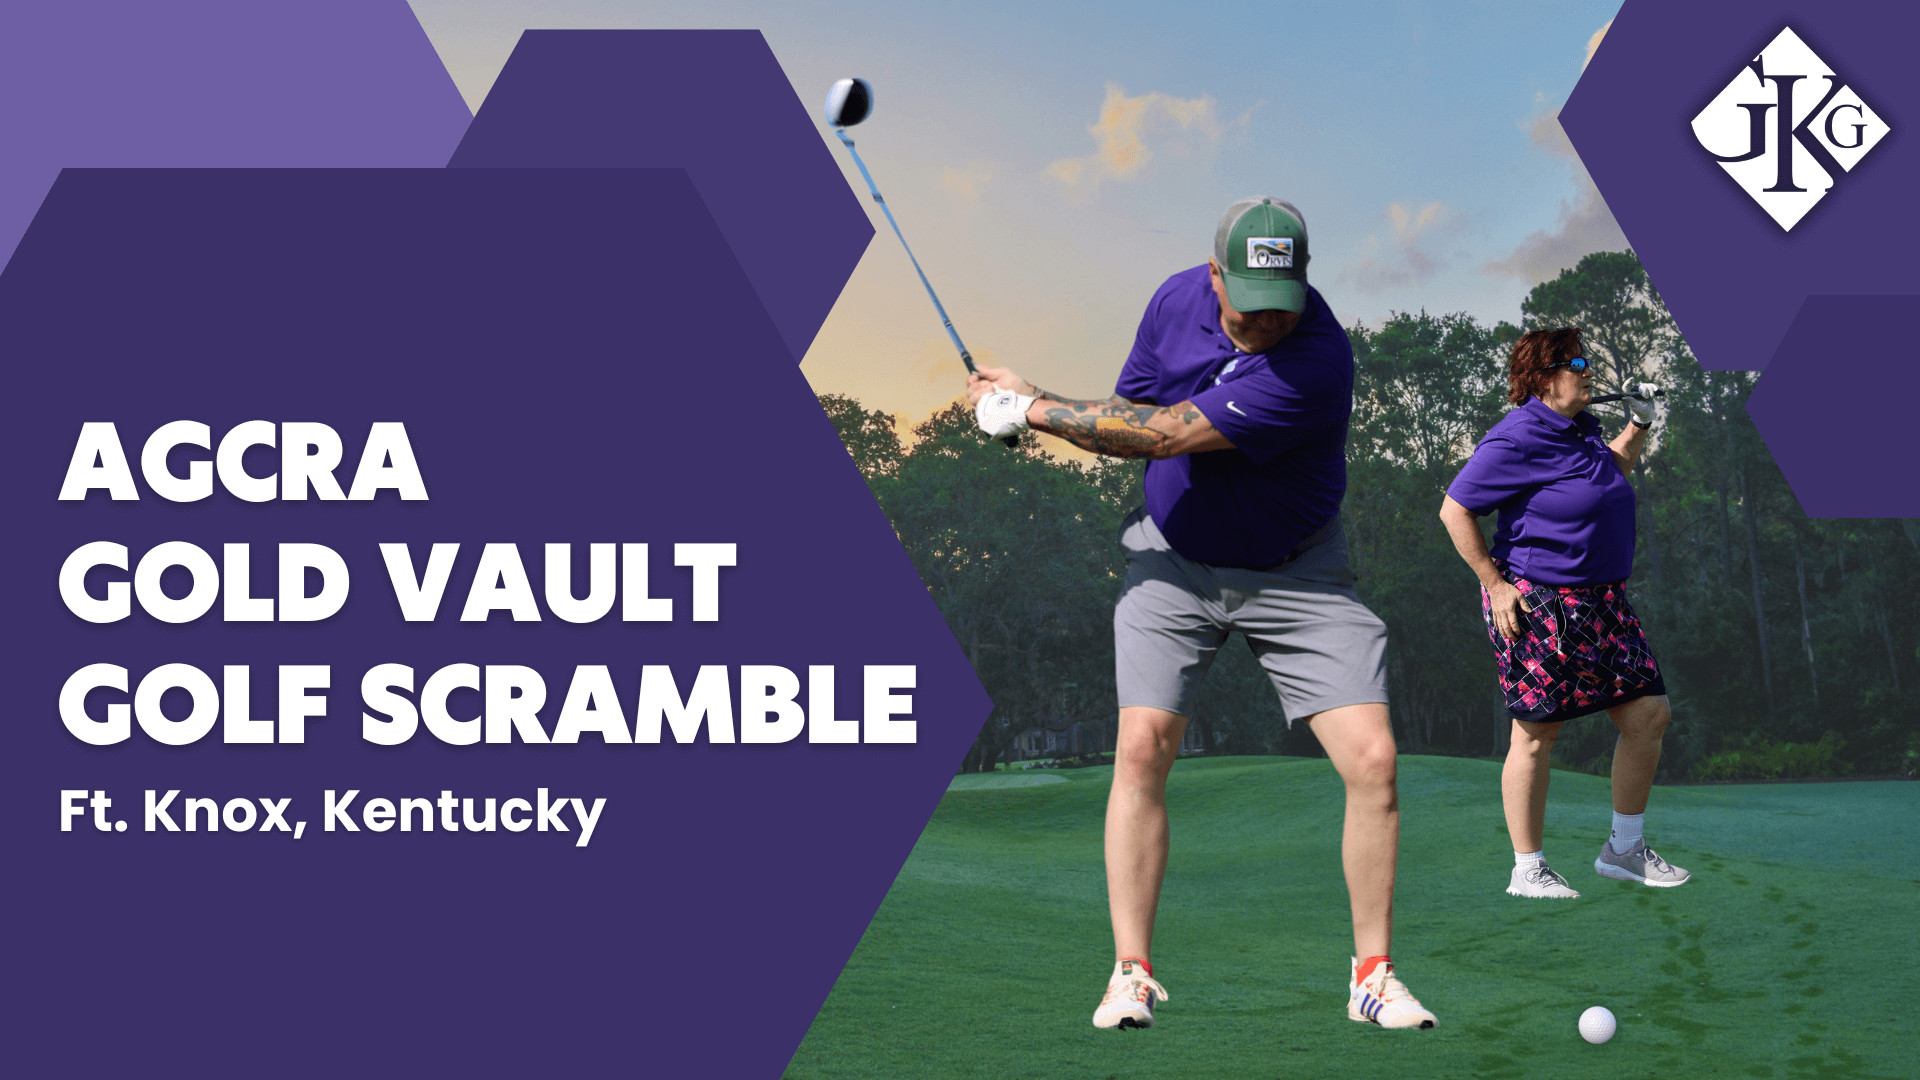 Two golfers in purple outfits participating in the Human Capital Management golf scramble event at Fort Knox, Kentucky, with one swinging a club.